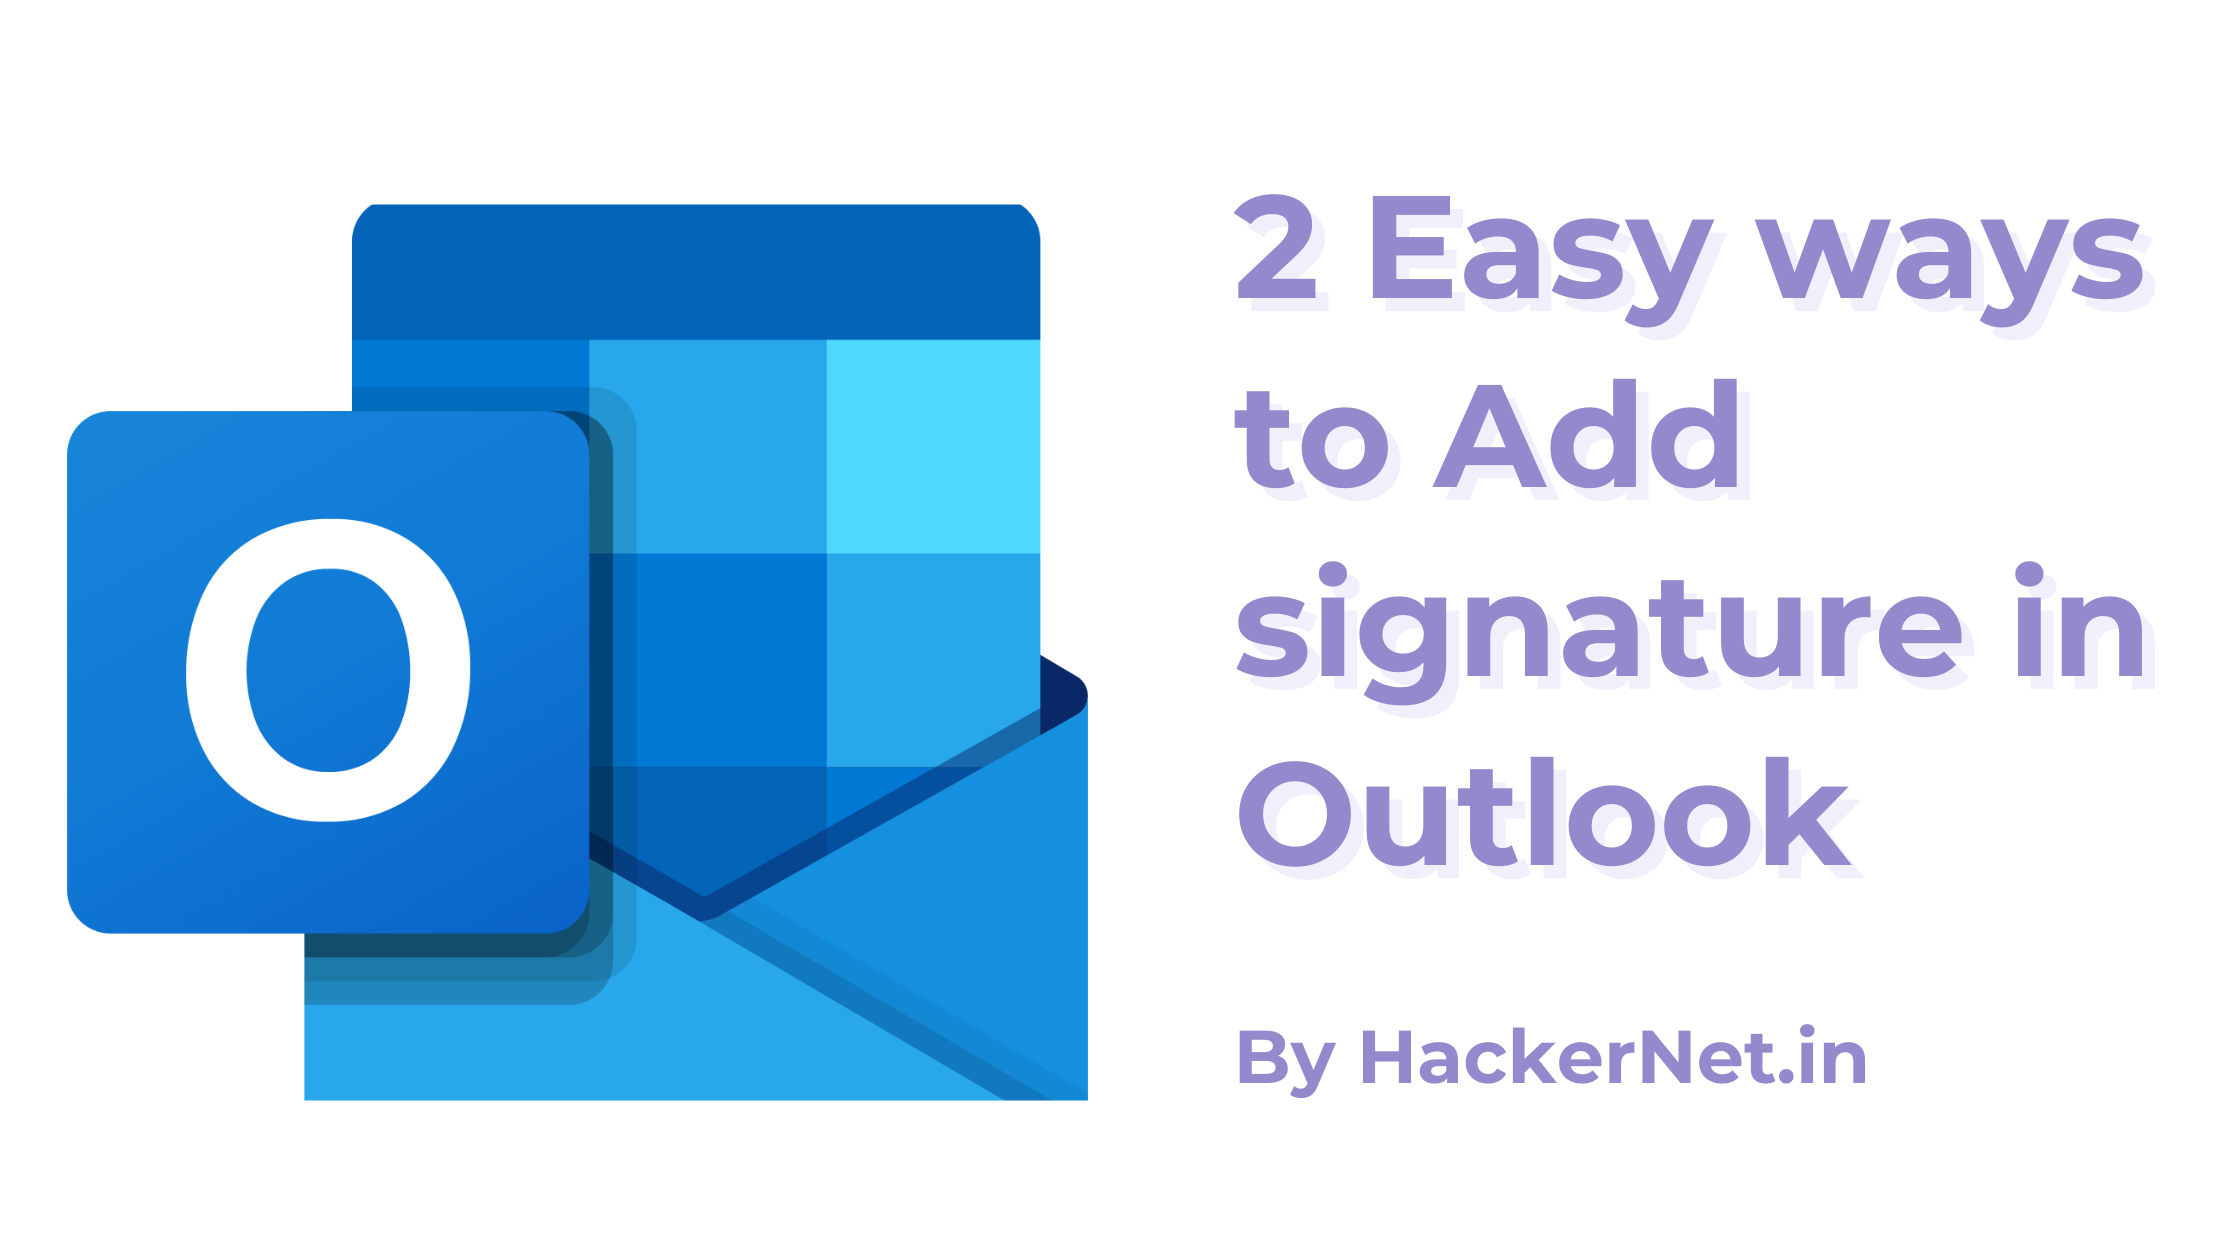 2 Easy ways to Add signature in Outlook